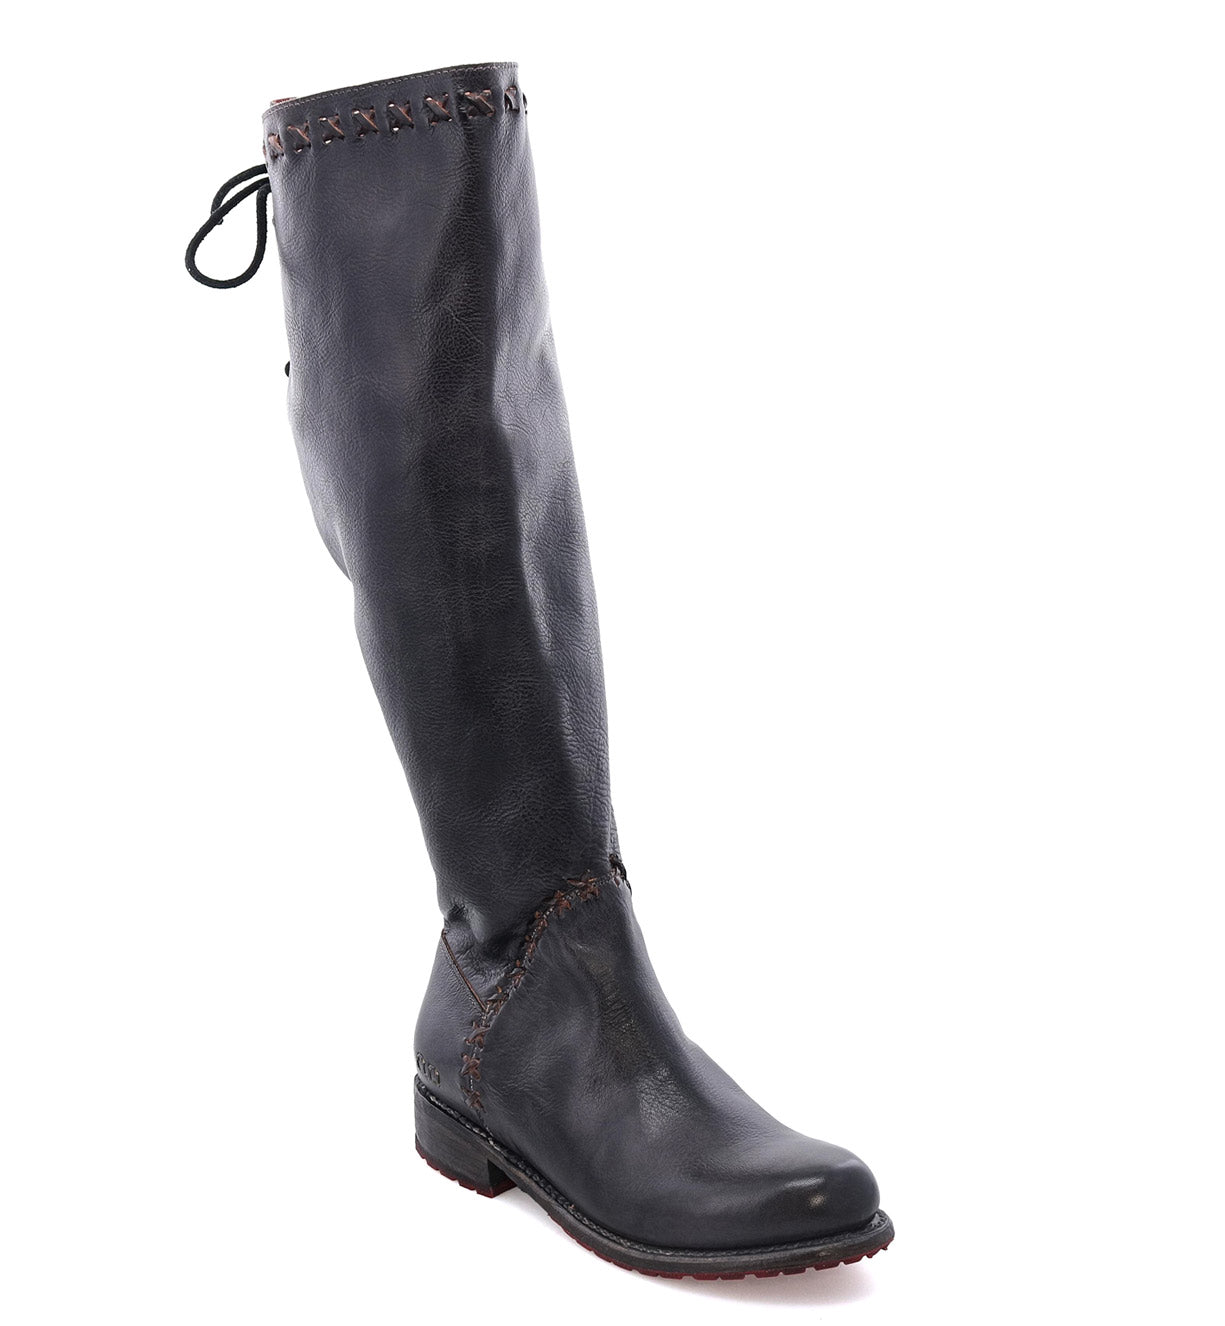 A women's black leather boot with lace detailing, the Manchester III by Bed Stu.